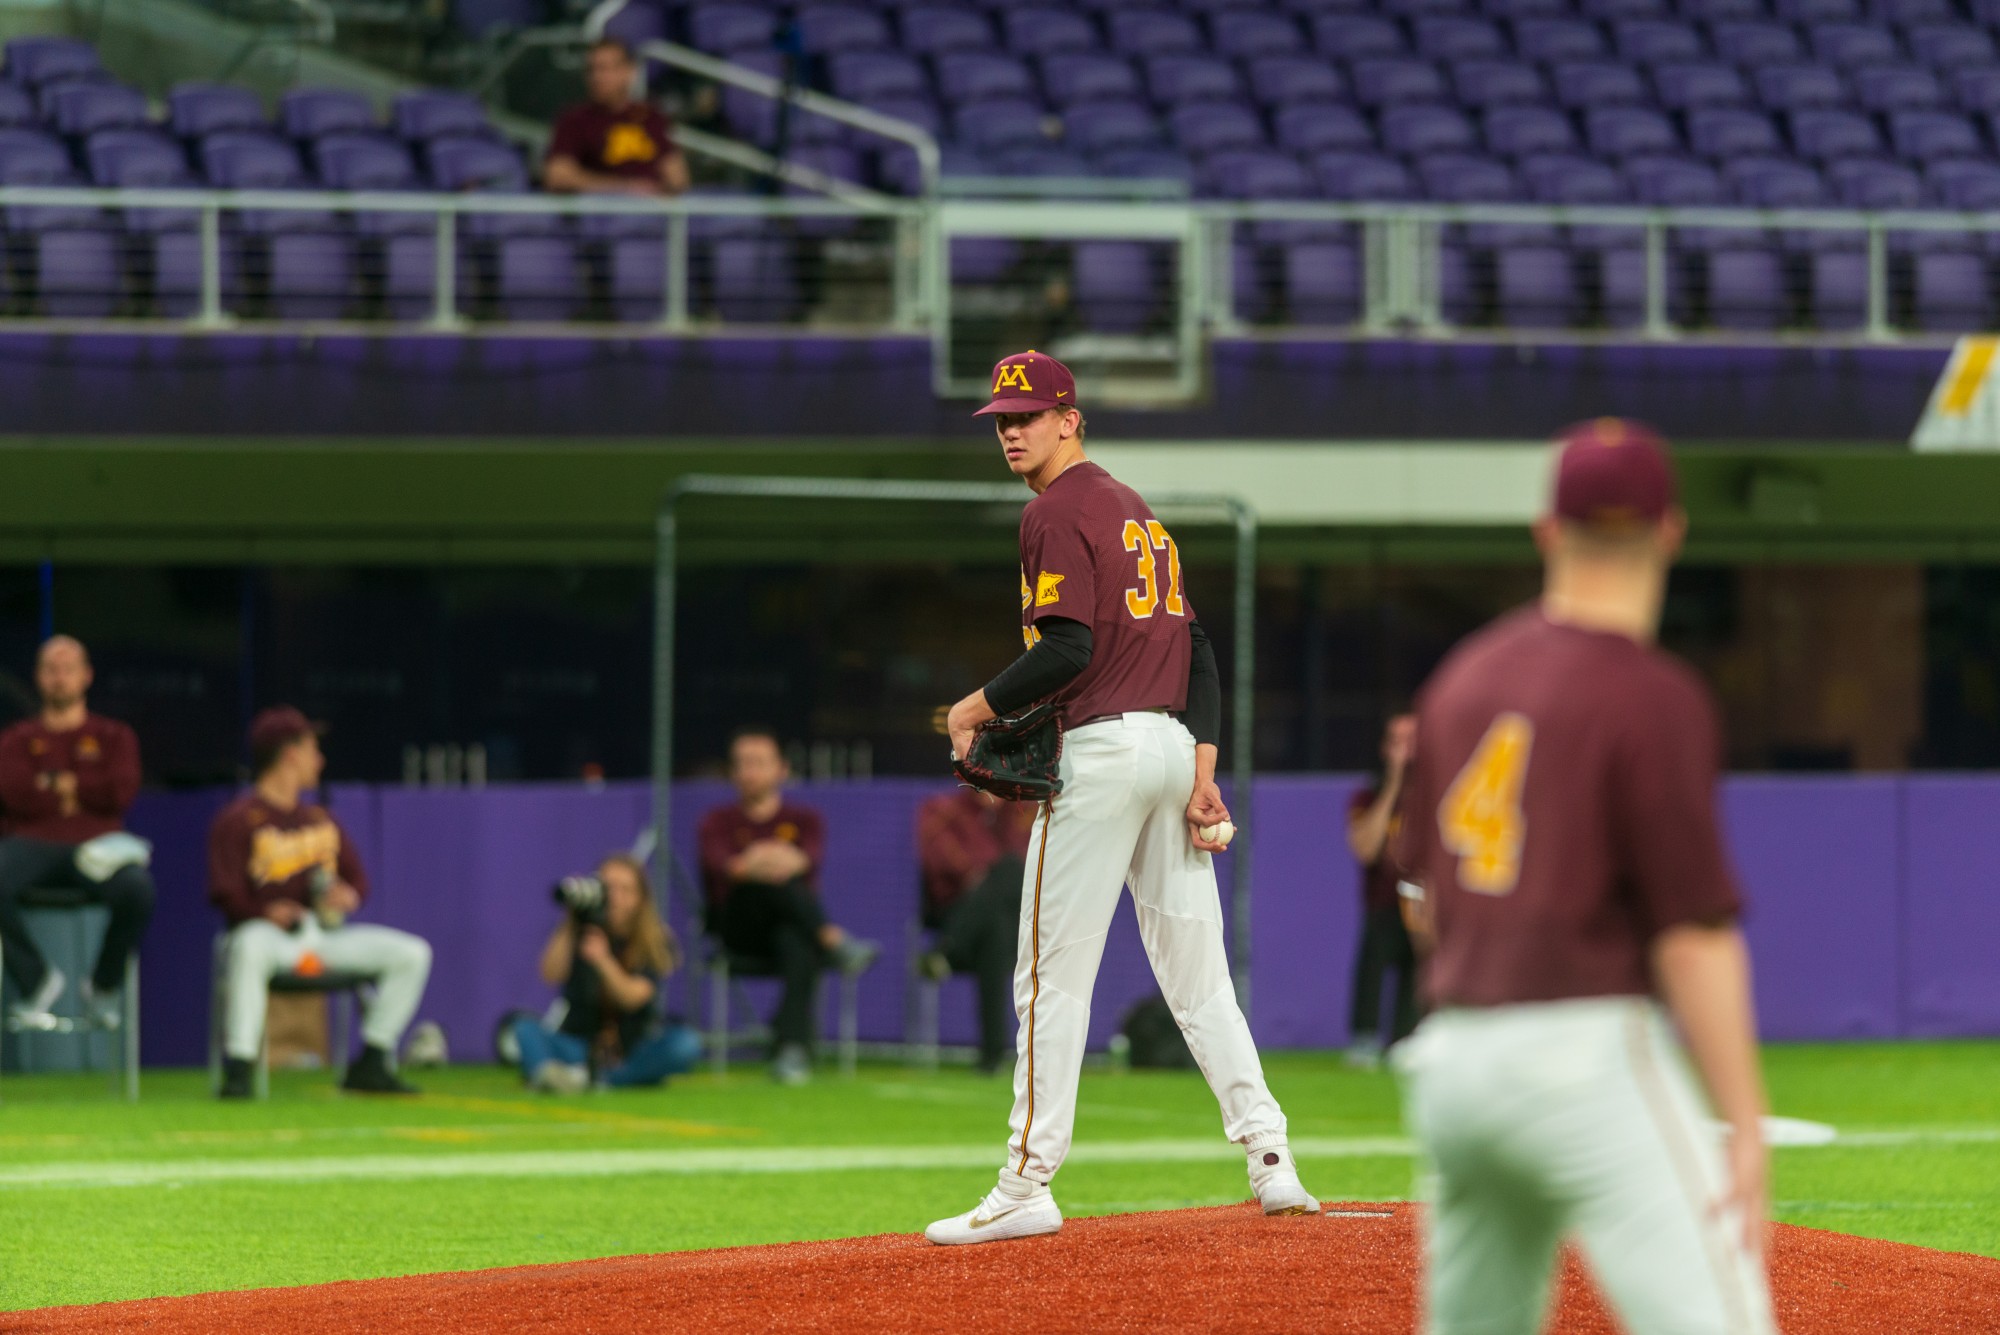 Gophers Pitcher Trent Schoeberl scans the field at U.S. Bank Stadium on Tuesday, March 3.